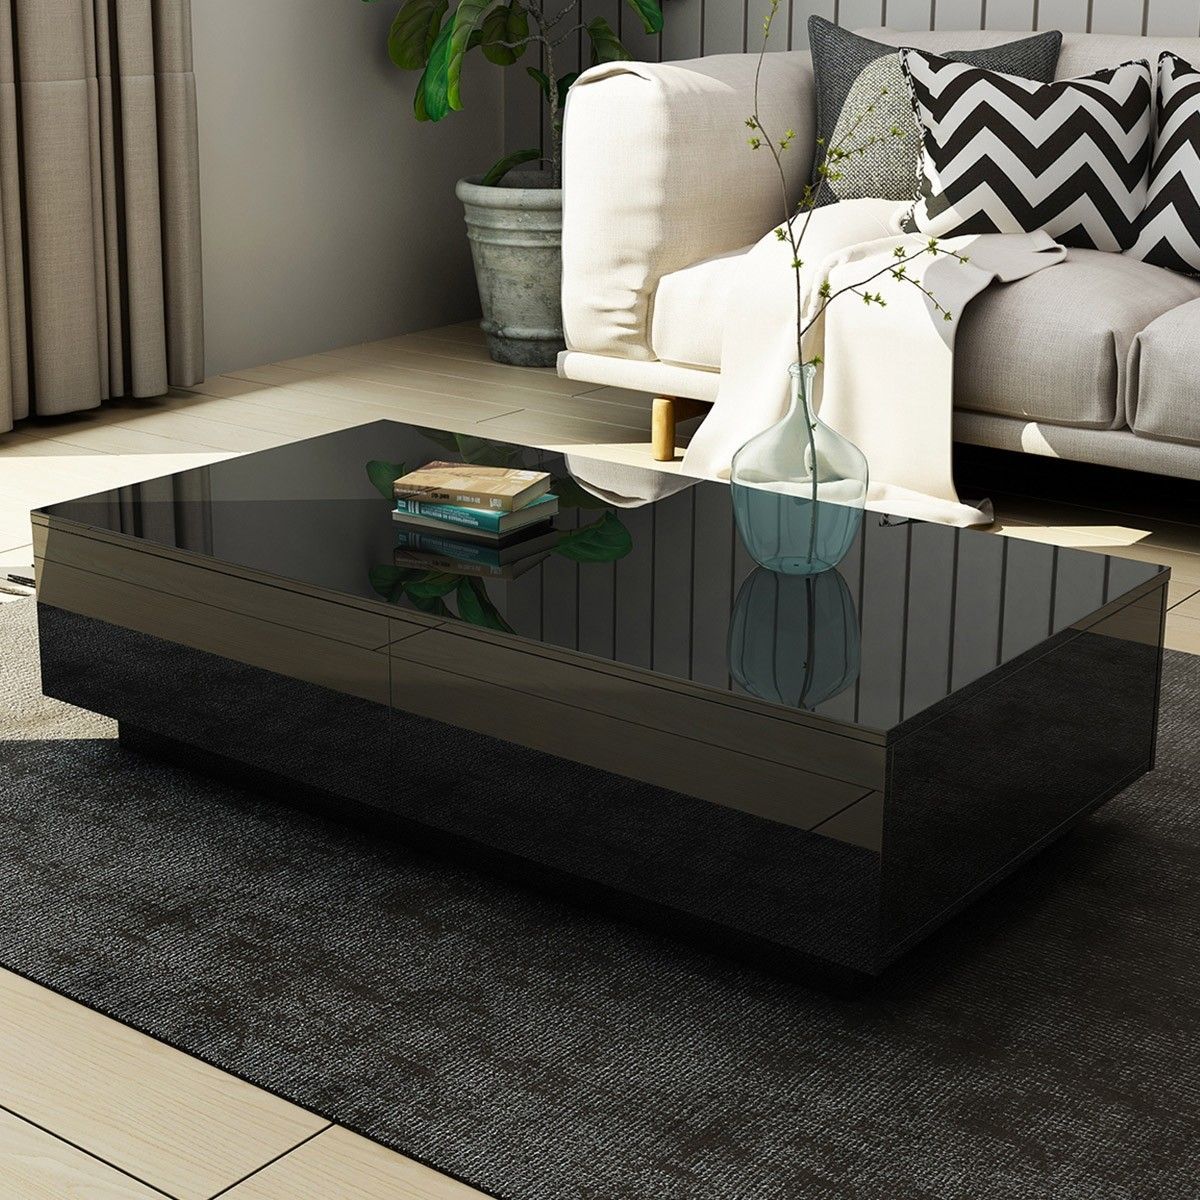 New 4 Drawer Coffee Table Wood Living Room Furniture High Gloss Black For High Gloss Black Coffee Tables (View 17 of 20)